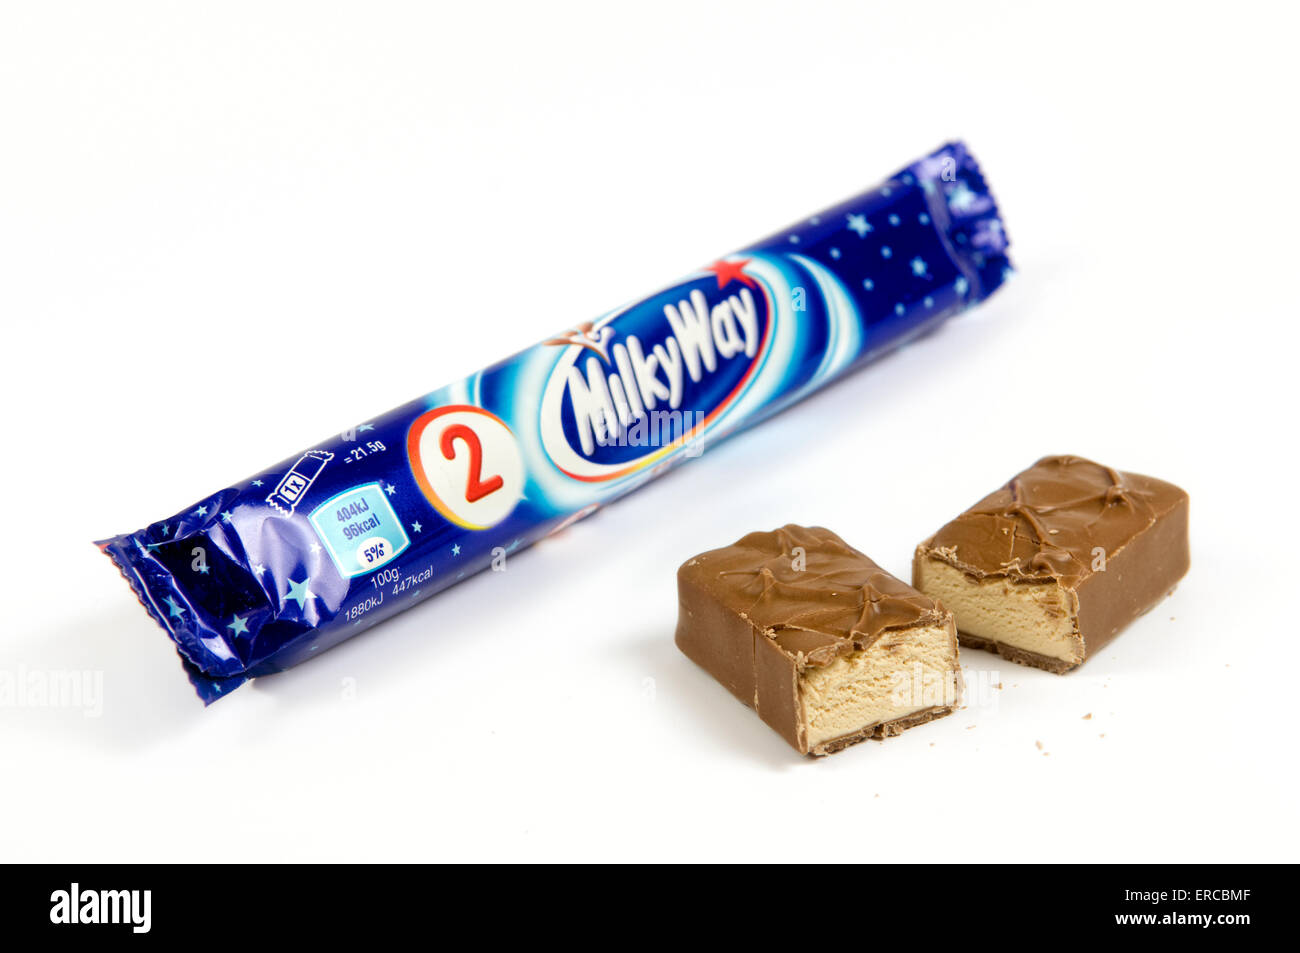 milky-way-chocolate-bar-on-white-background-with-open-cut-up-bar-by-ercbmf.jpg